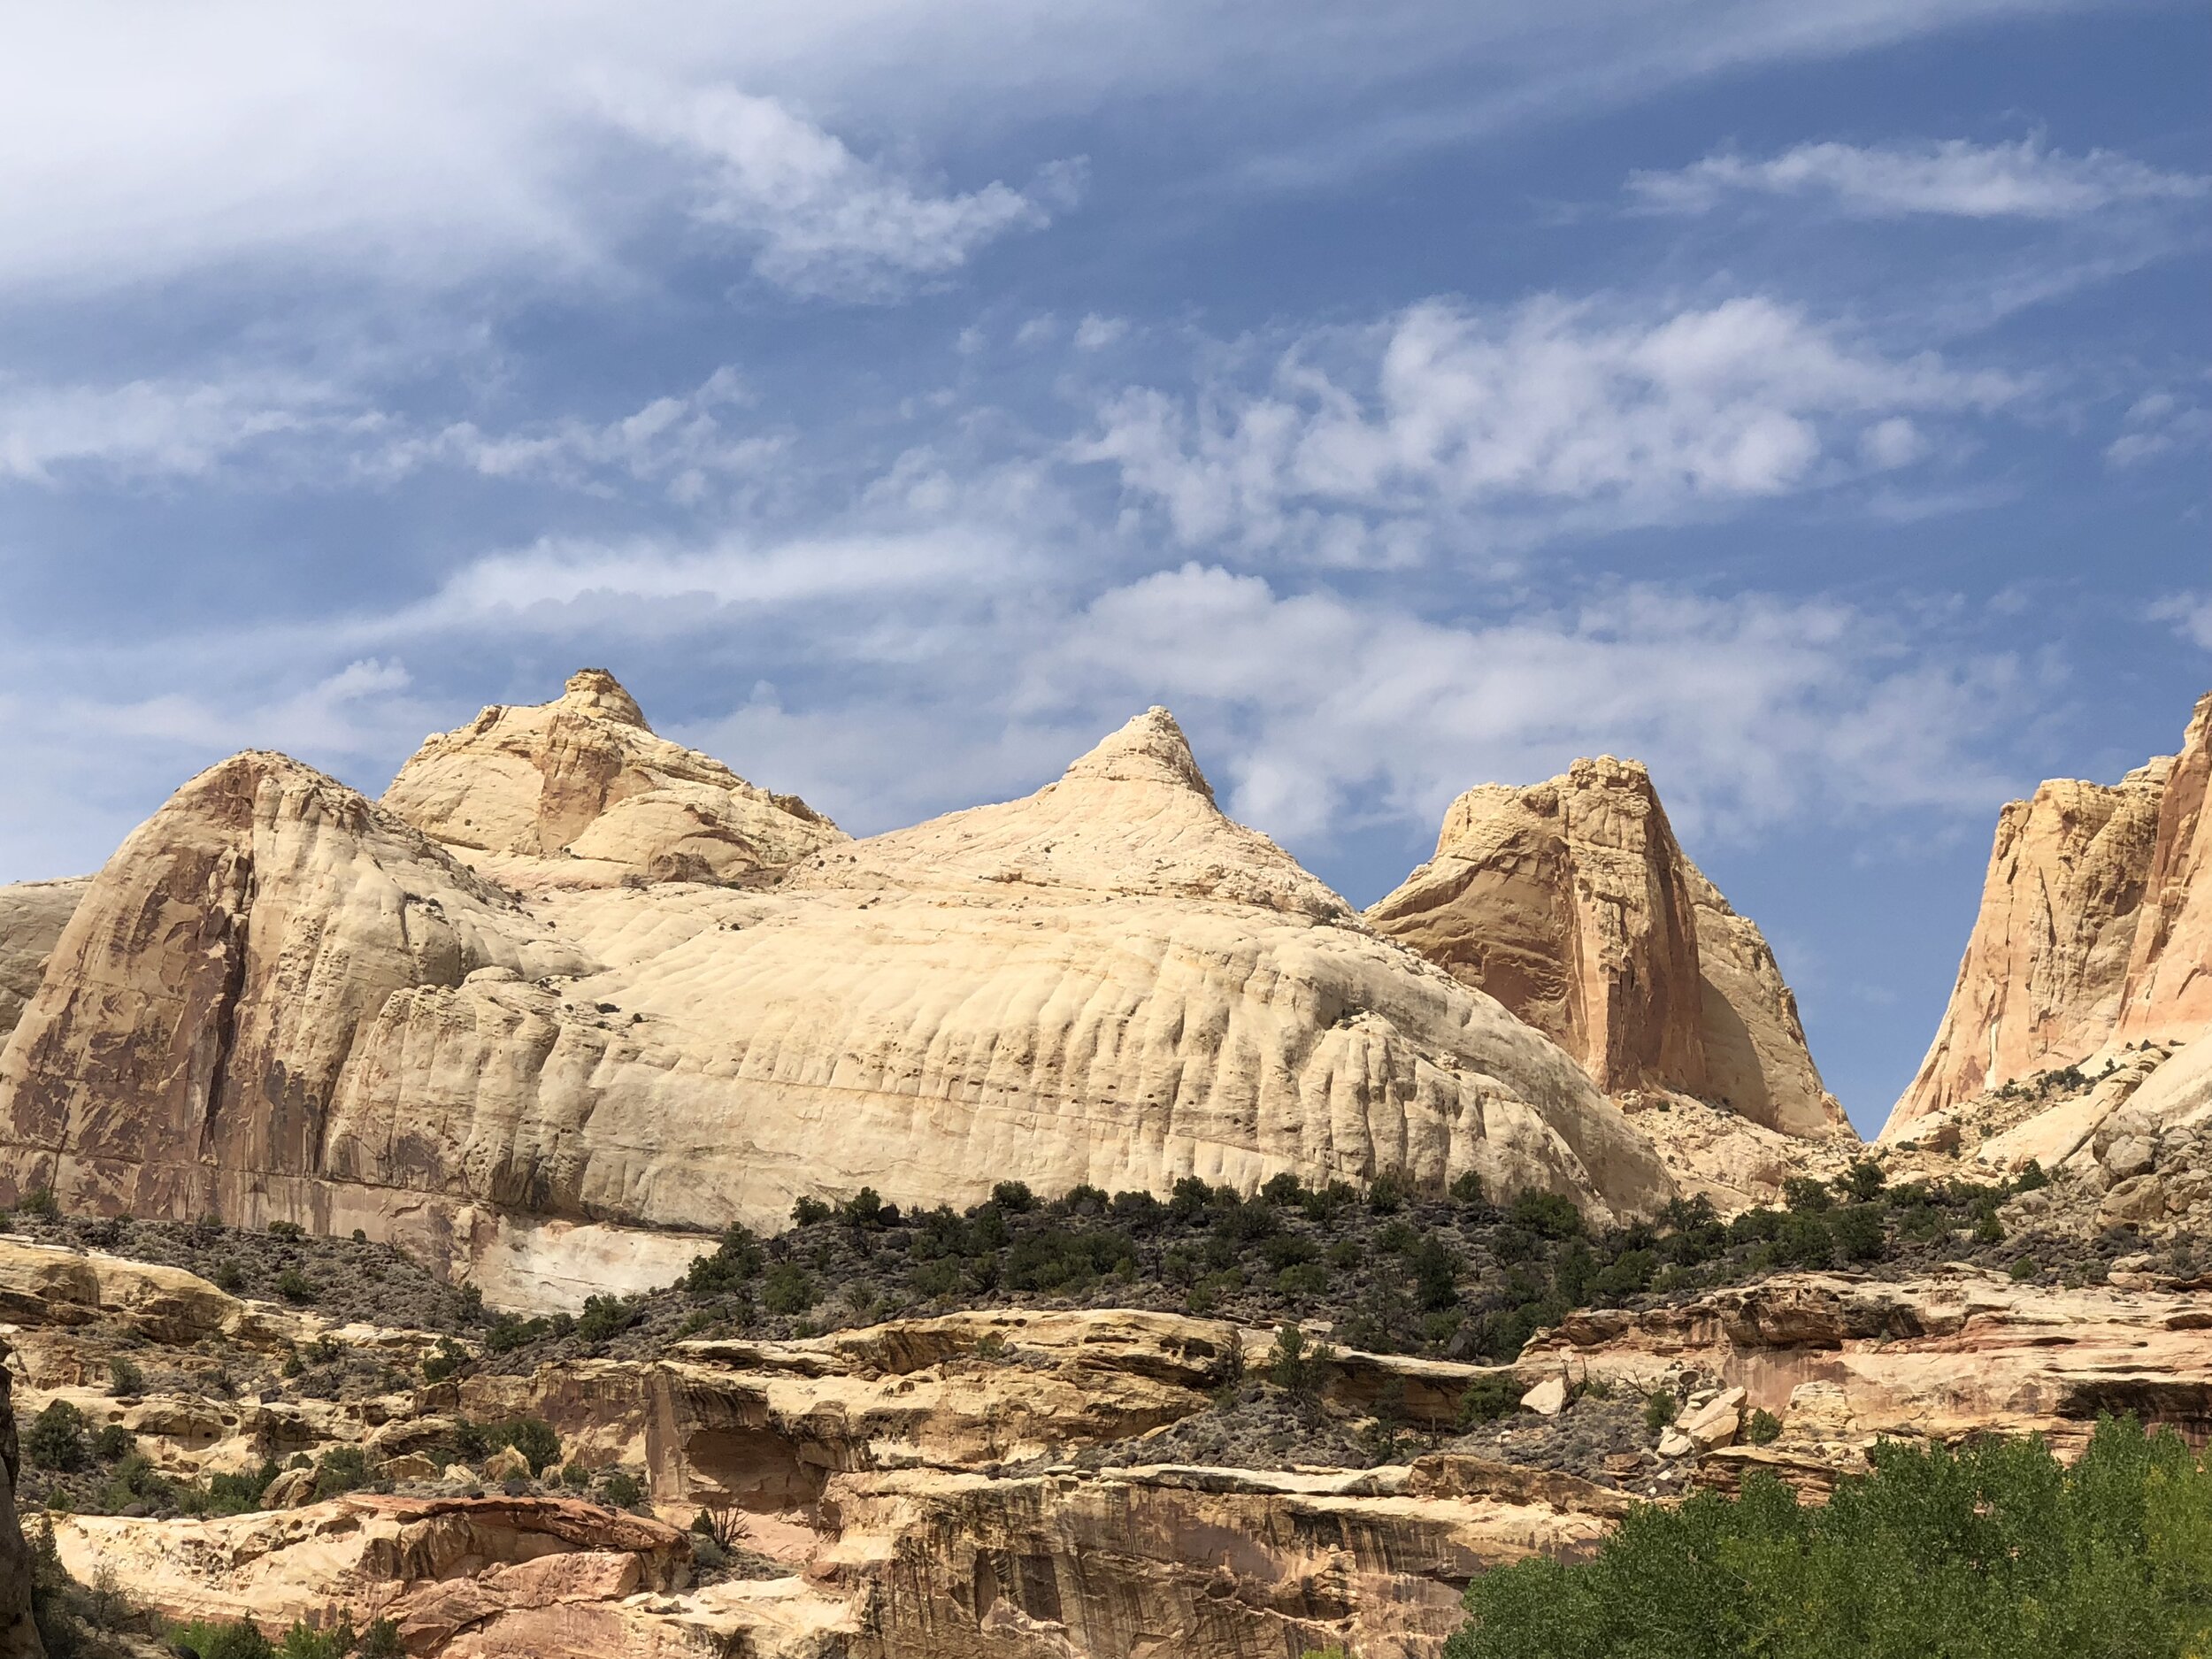 Erosion of Capitol Reef has created great domes reminiscent of the US Capitol dome.